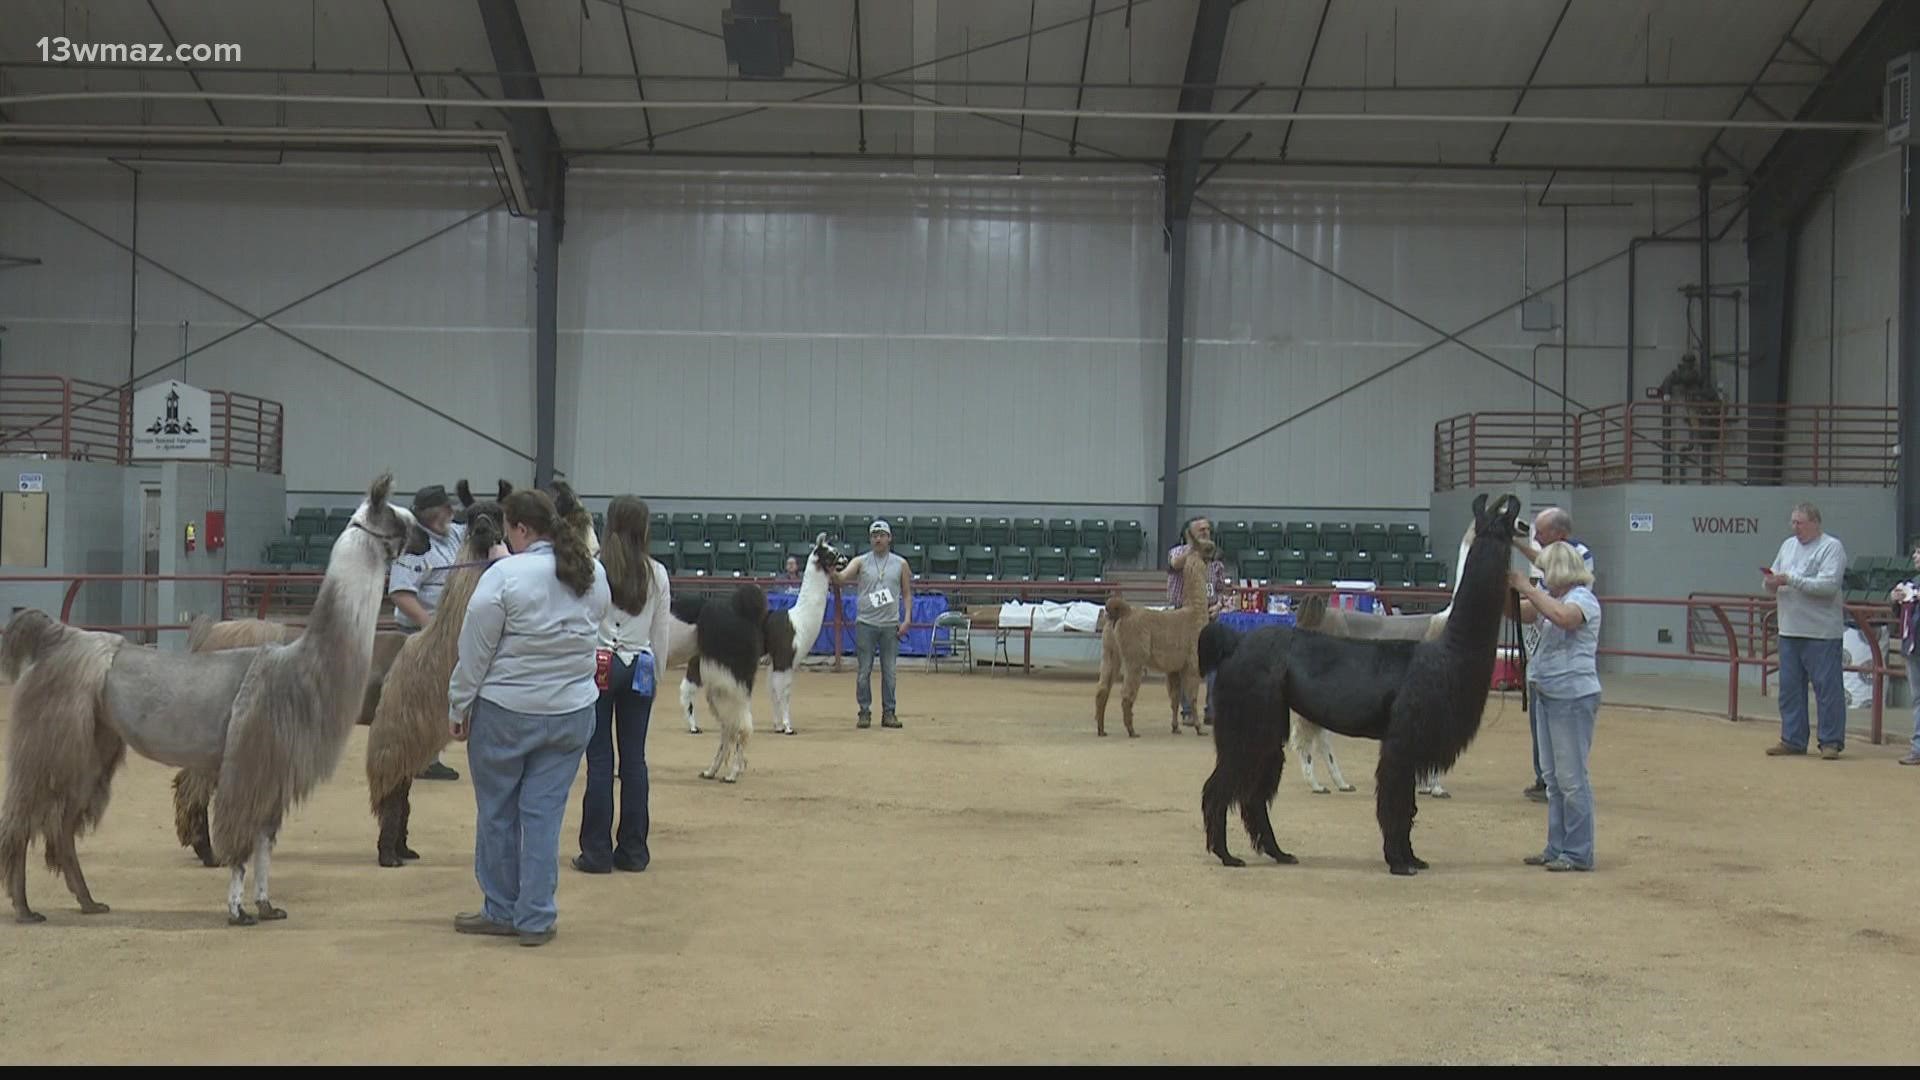 The show lasted two days and folks even traveled from the Carolinas to enter the competition.